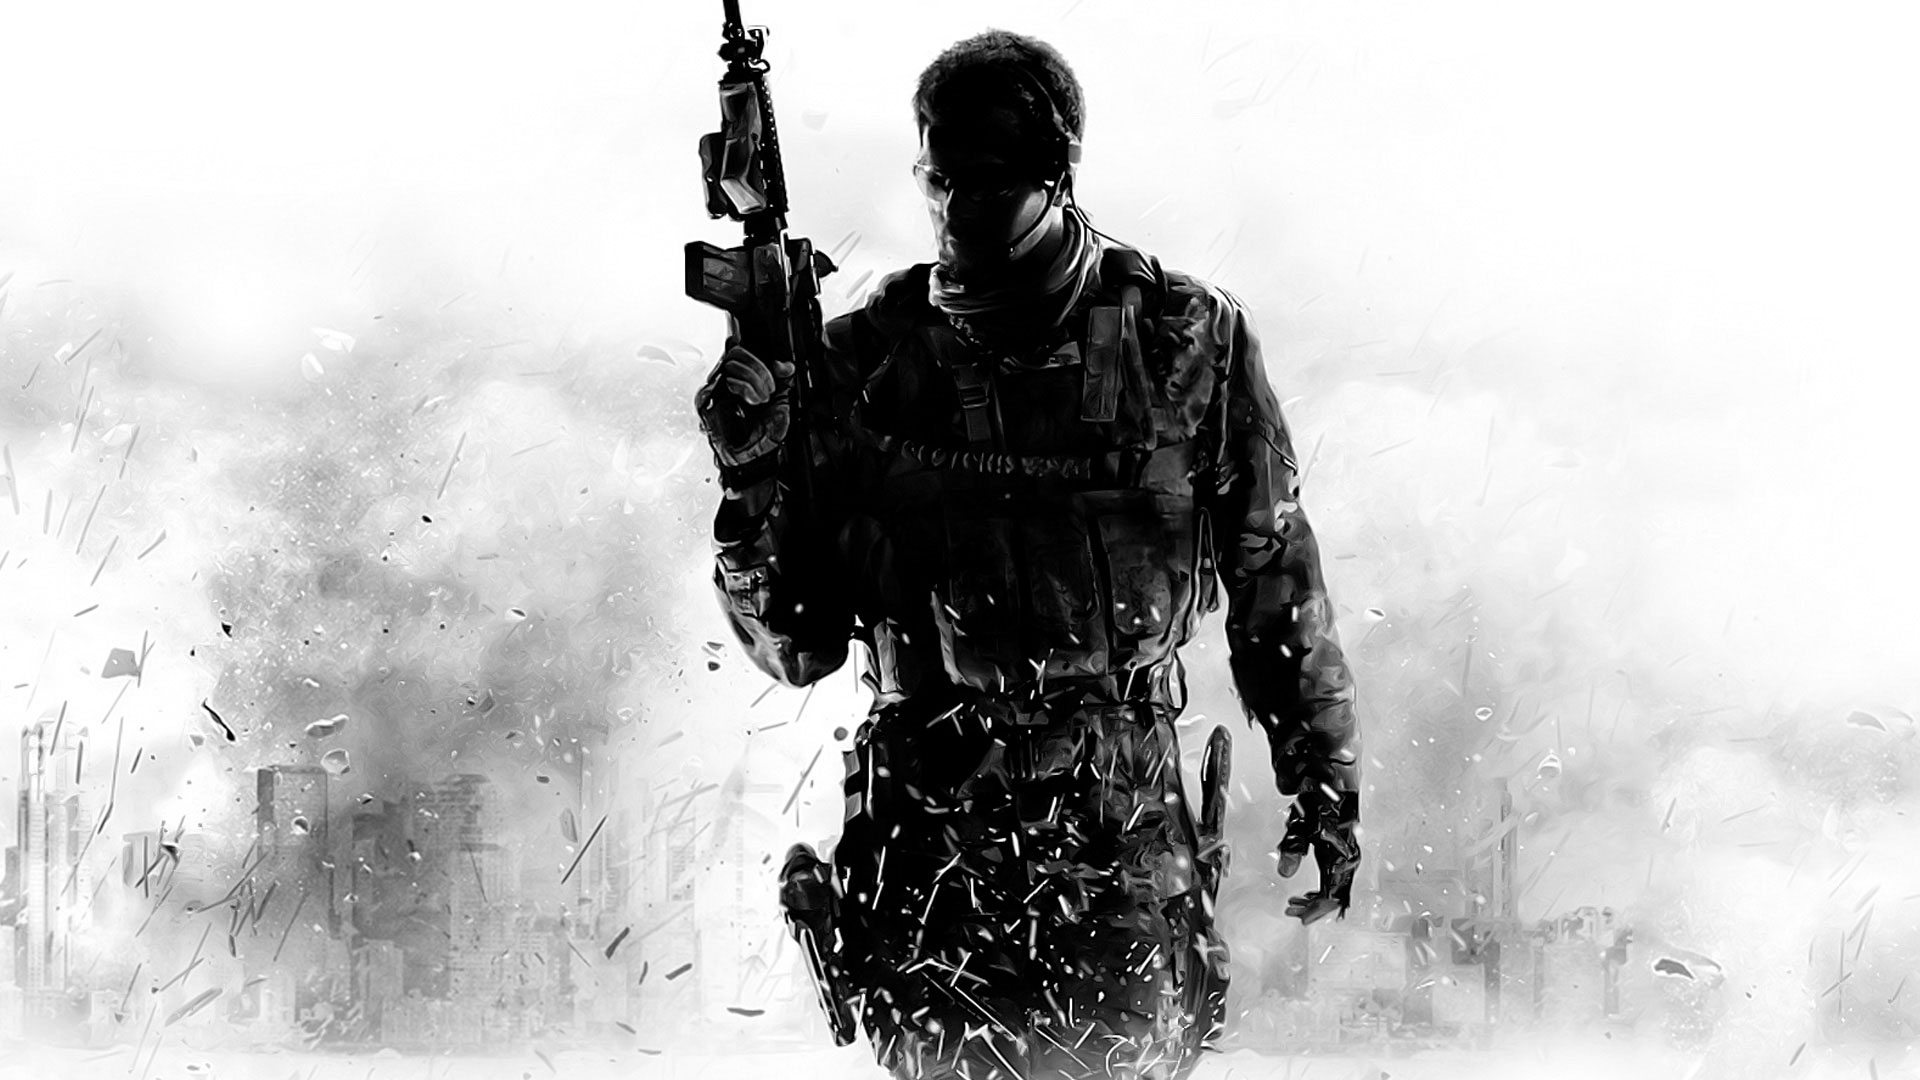 How To] Play Call of Duty Modern Warfare 3 Online For Free Using Steam  Dedicated Server Tools 